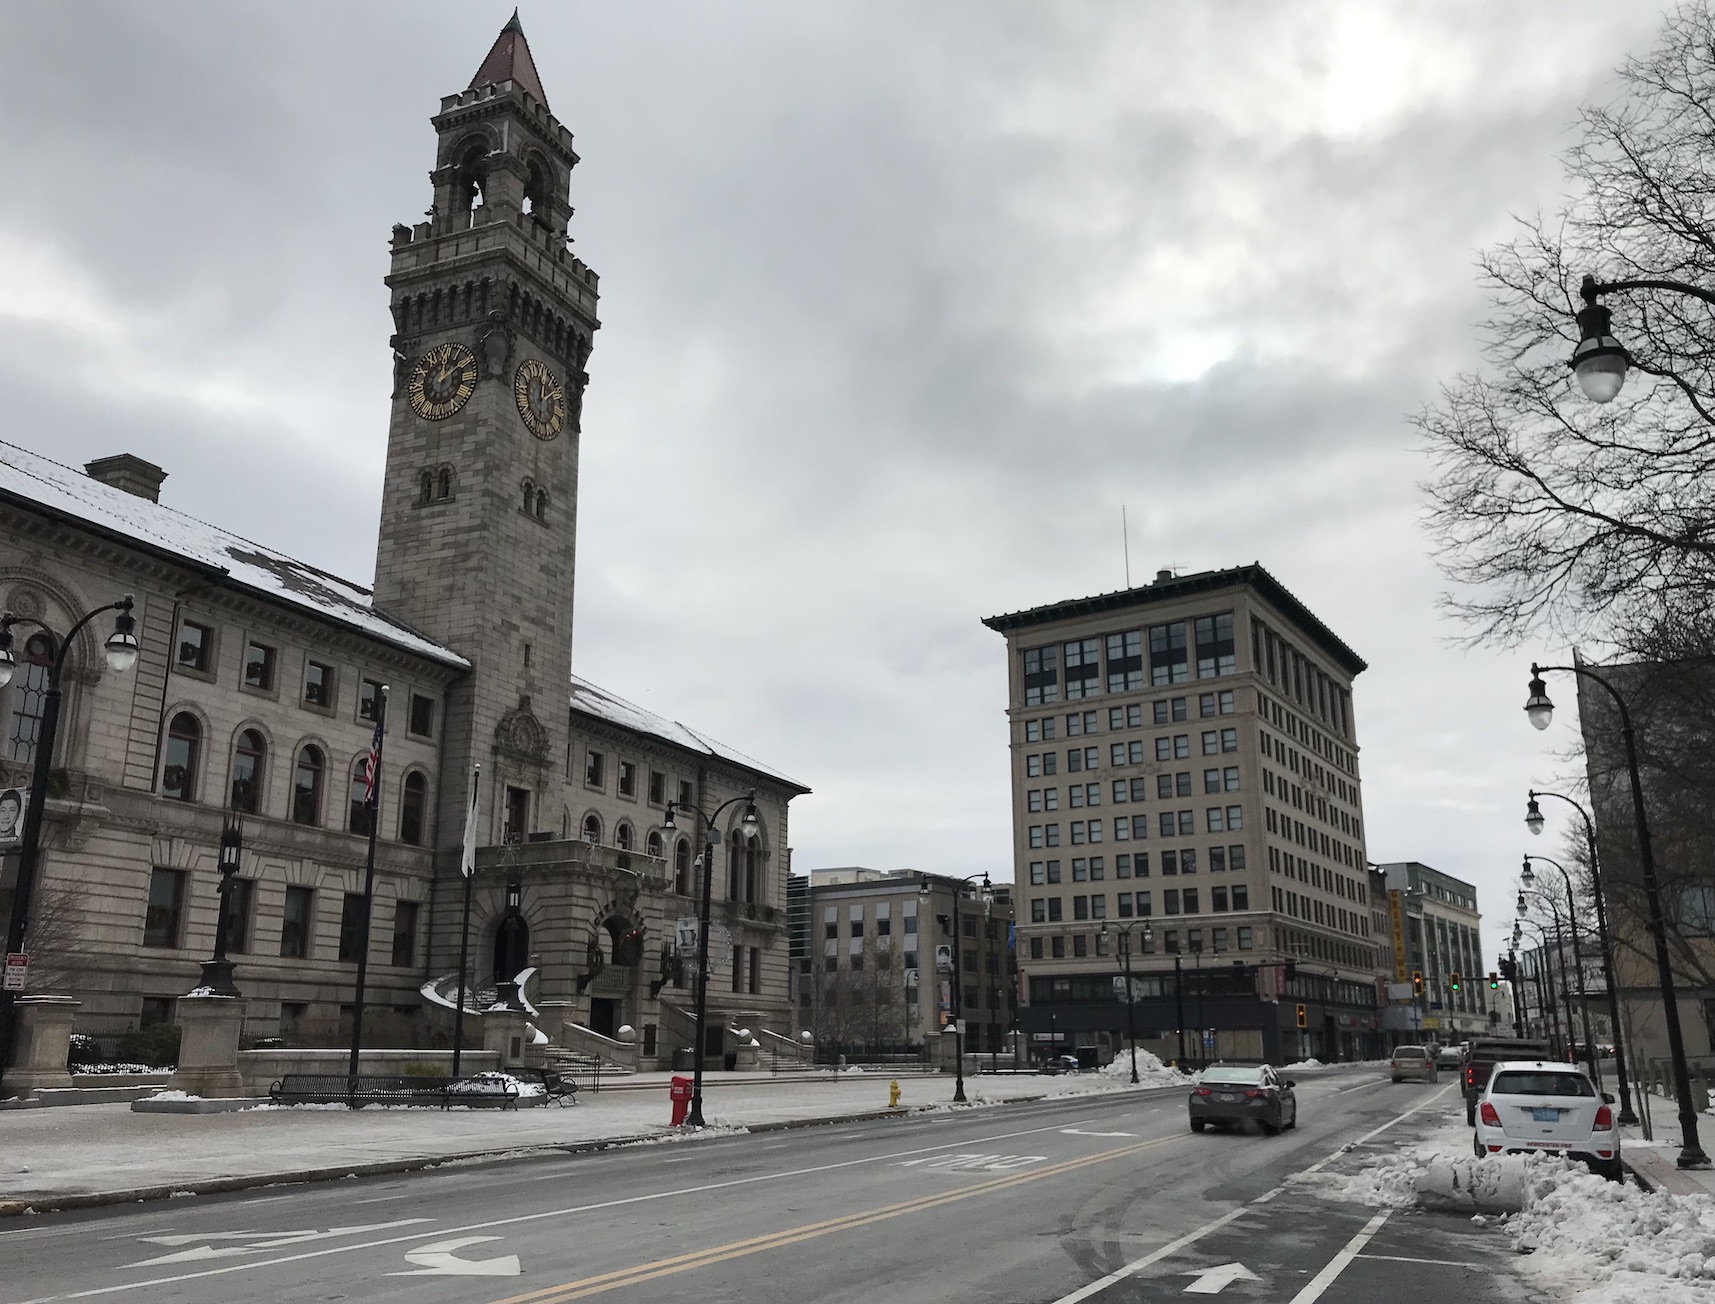 Worcester City Hall, an imposing Italianate building with a tall clock tower, and Worcester's Main Street on a gray December day.